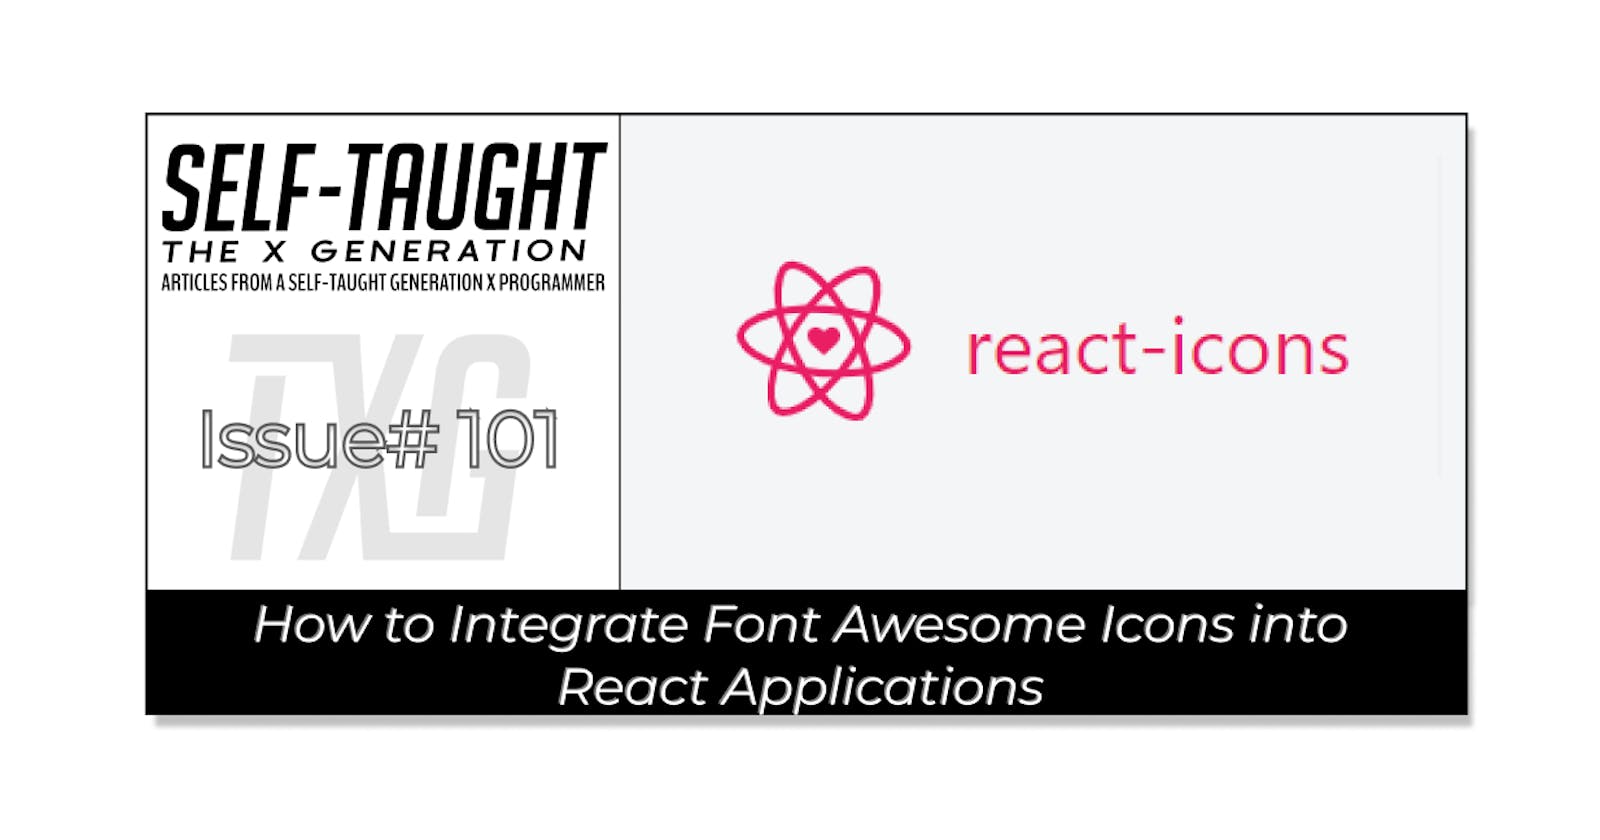 How to Integrate Font Awesome Icons into React Applications